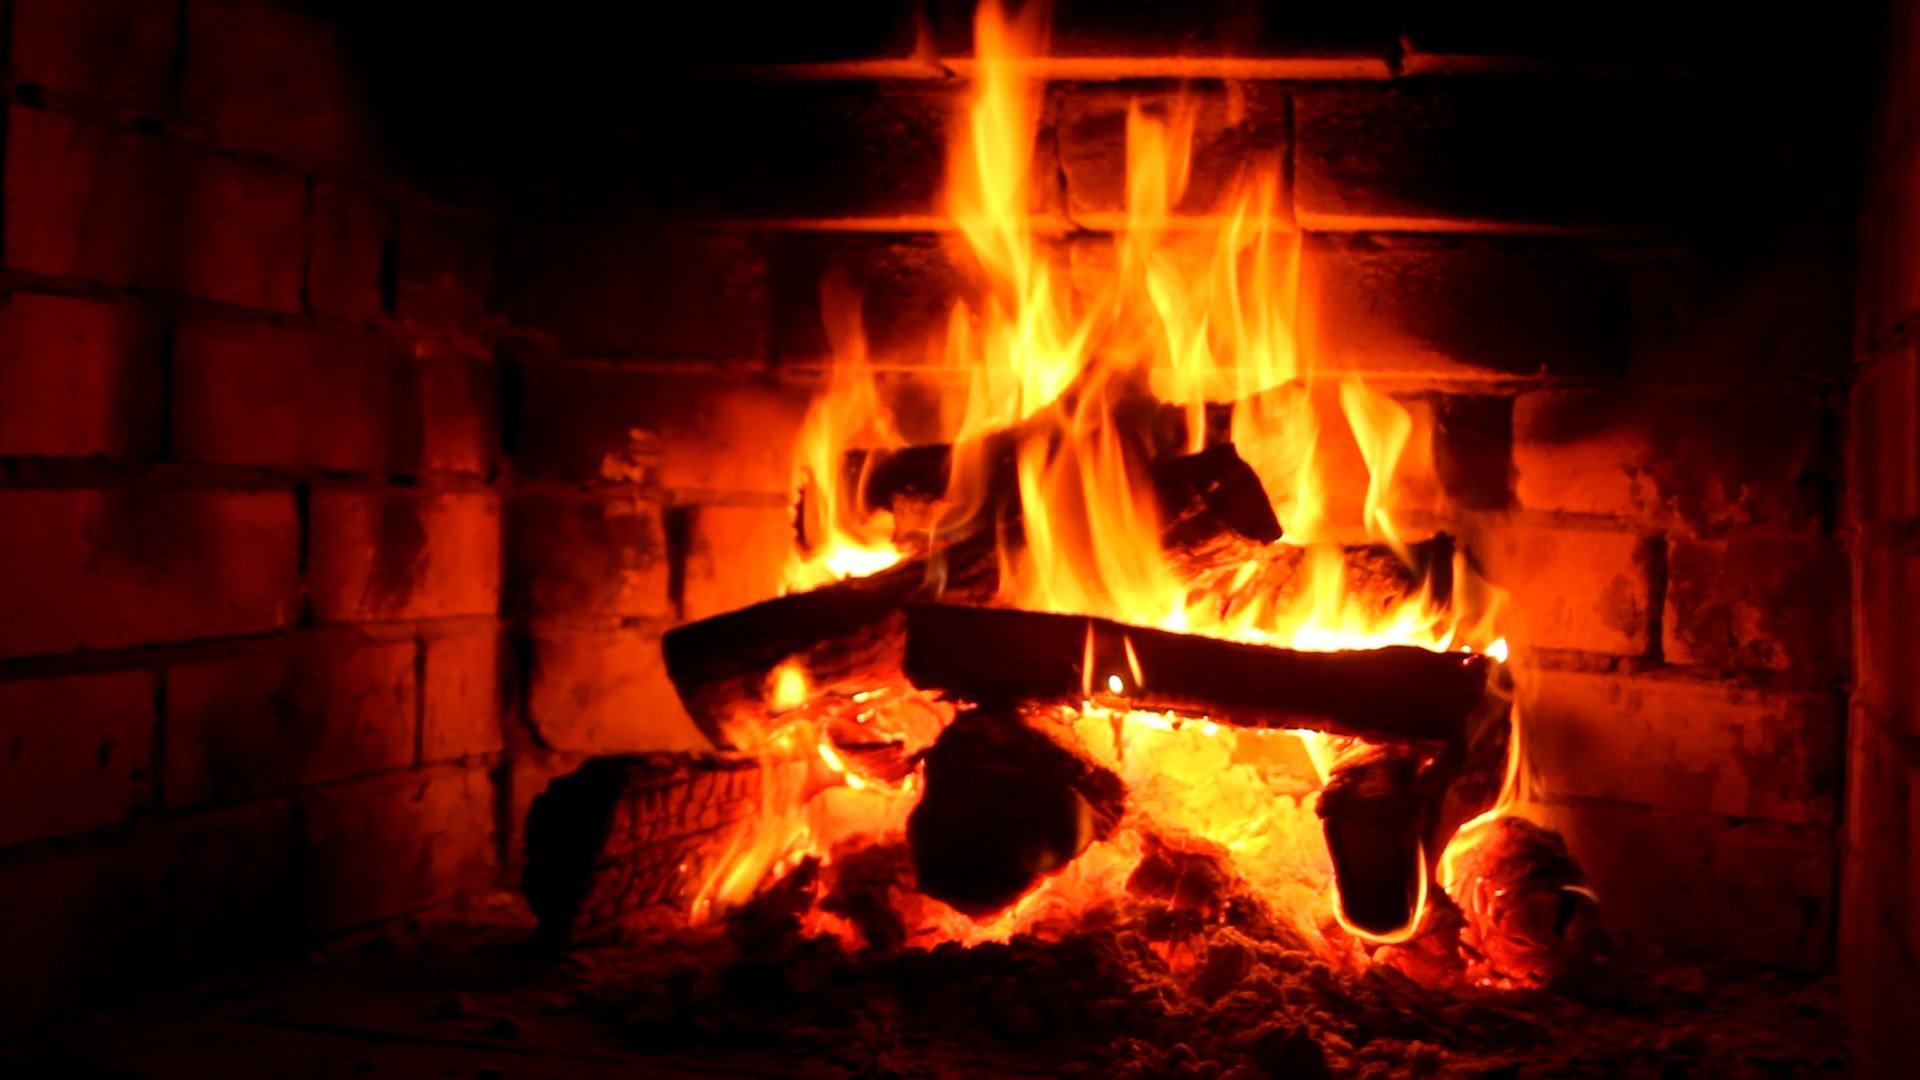 Listen to classic (and out of copyright) stories, poems and creepypasta by a roaring fire at By The Fireside. Wholesome stuff.